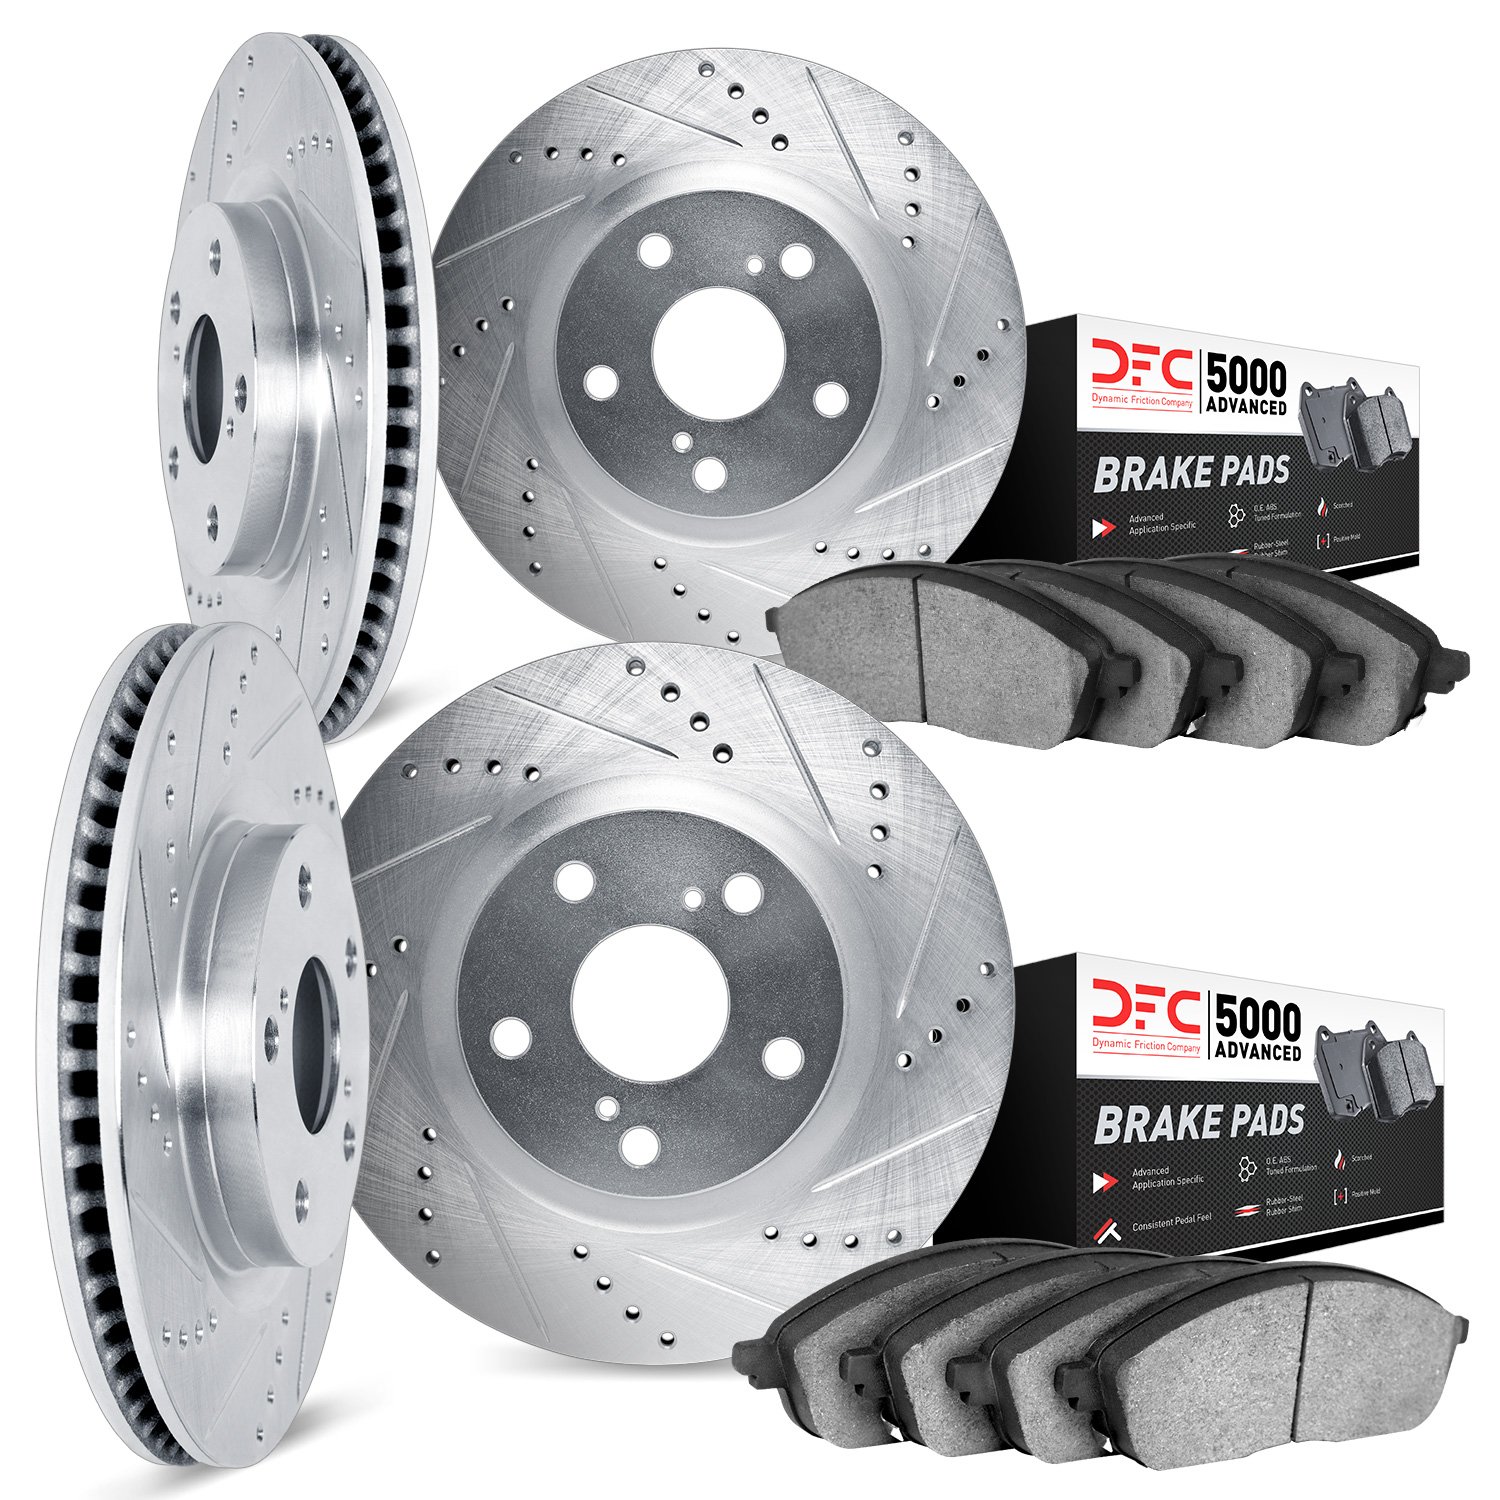 7504-31006 Drilled/Slotted Brake Rotors w/5000 Advanced Brake Pads Kit [Silver], 1995-2001 BMW, Position: Front and Rear